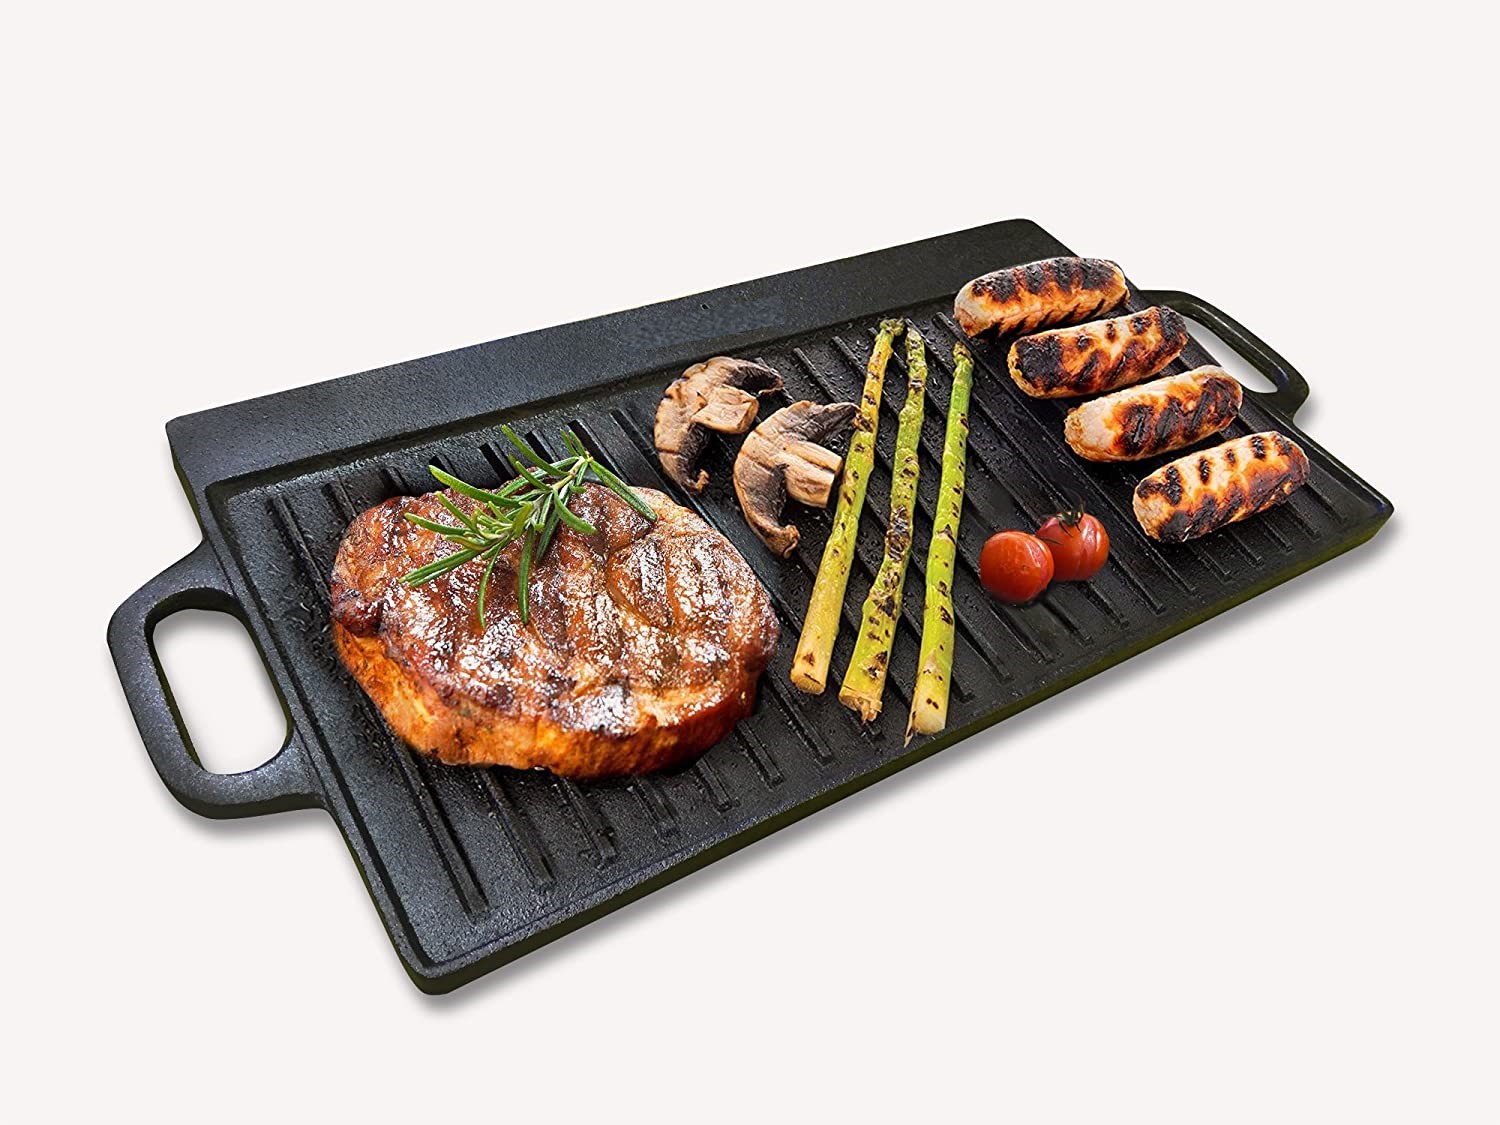 This_image_shows_meat_being_cooked_on_cast_iron_griddle